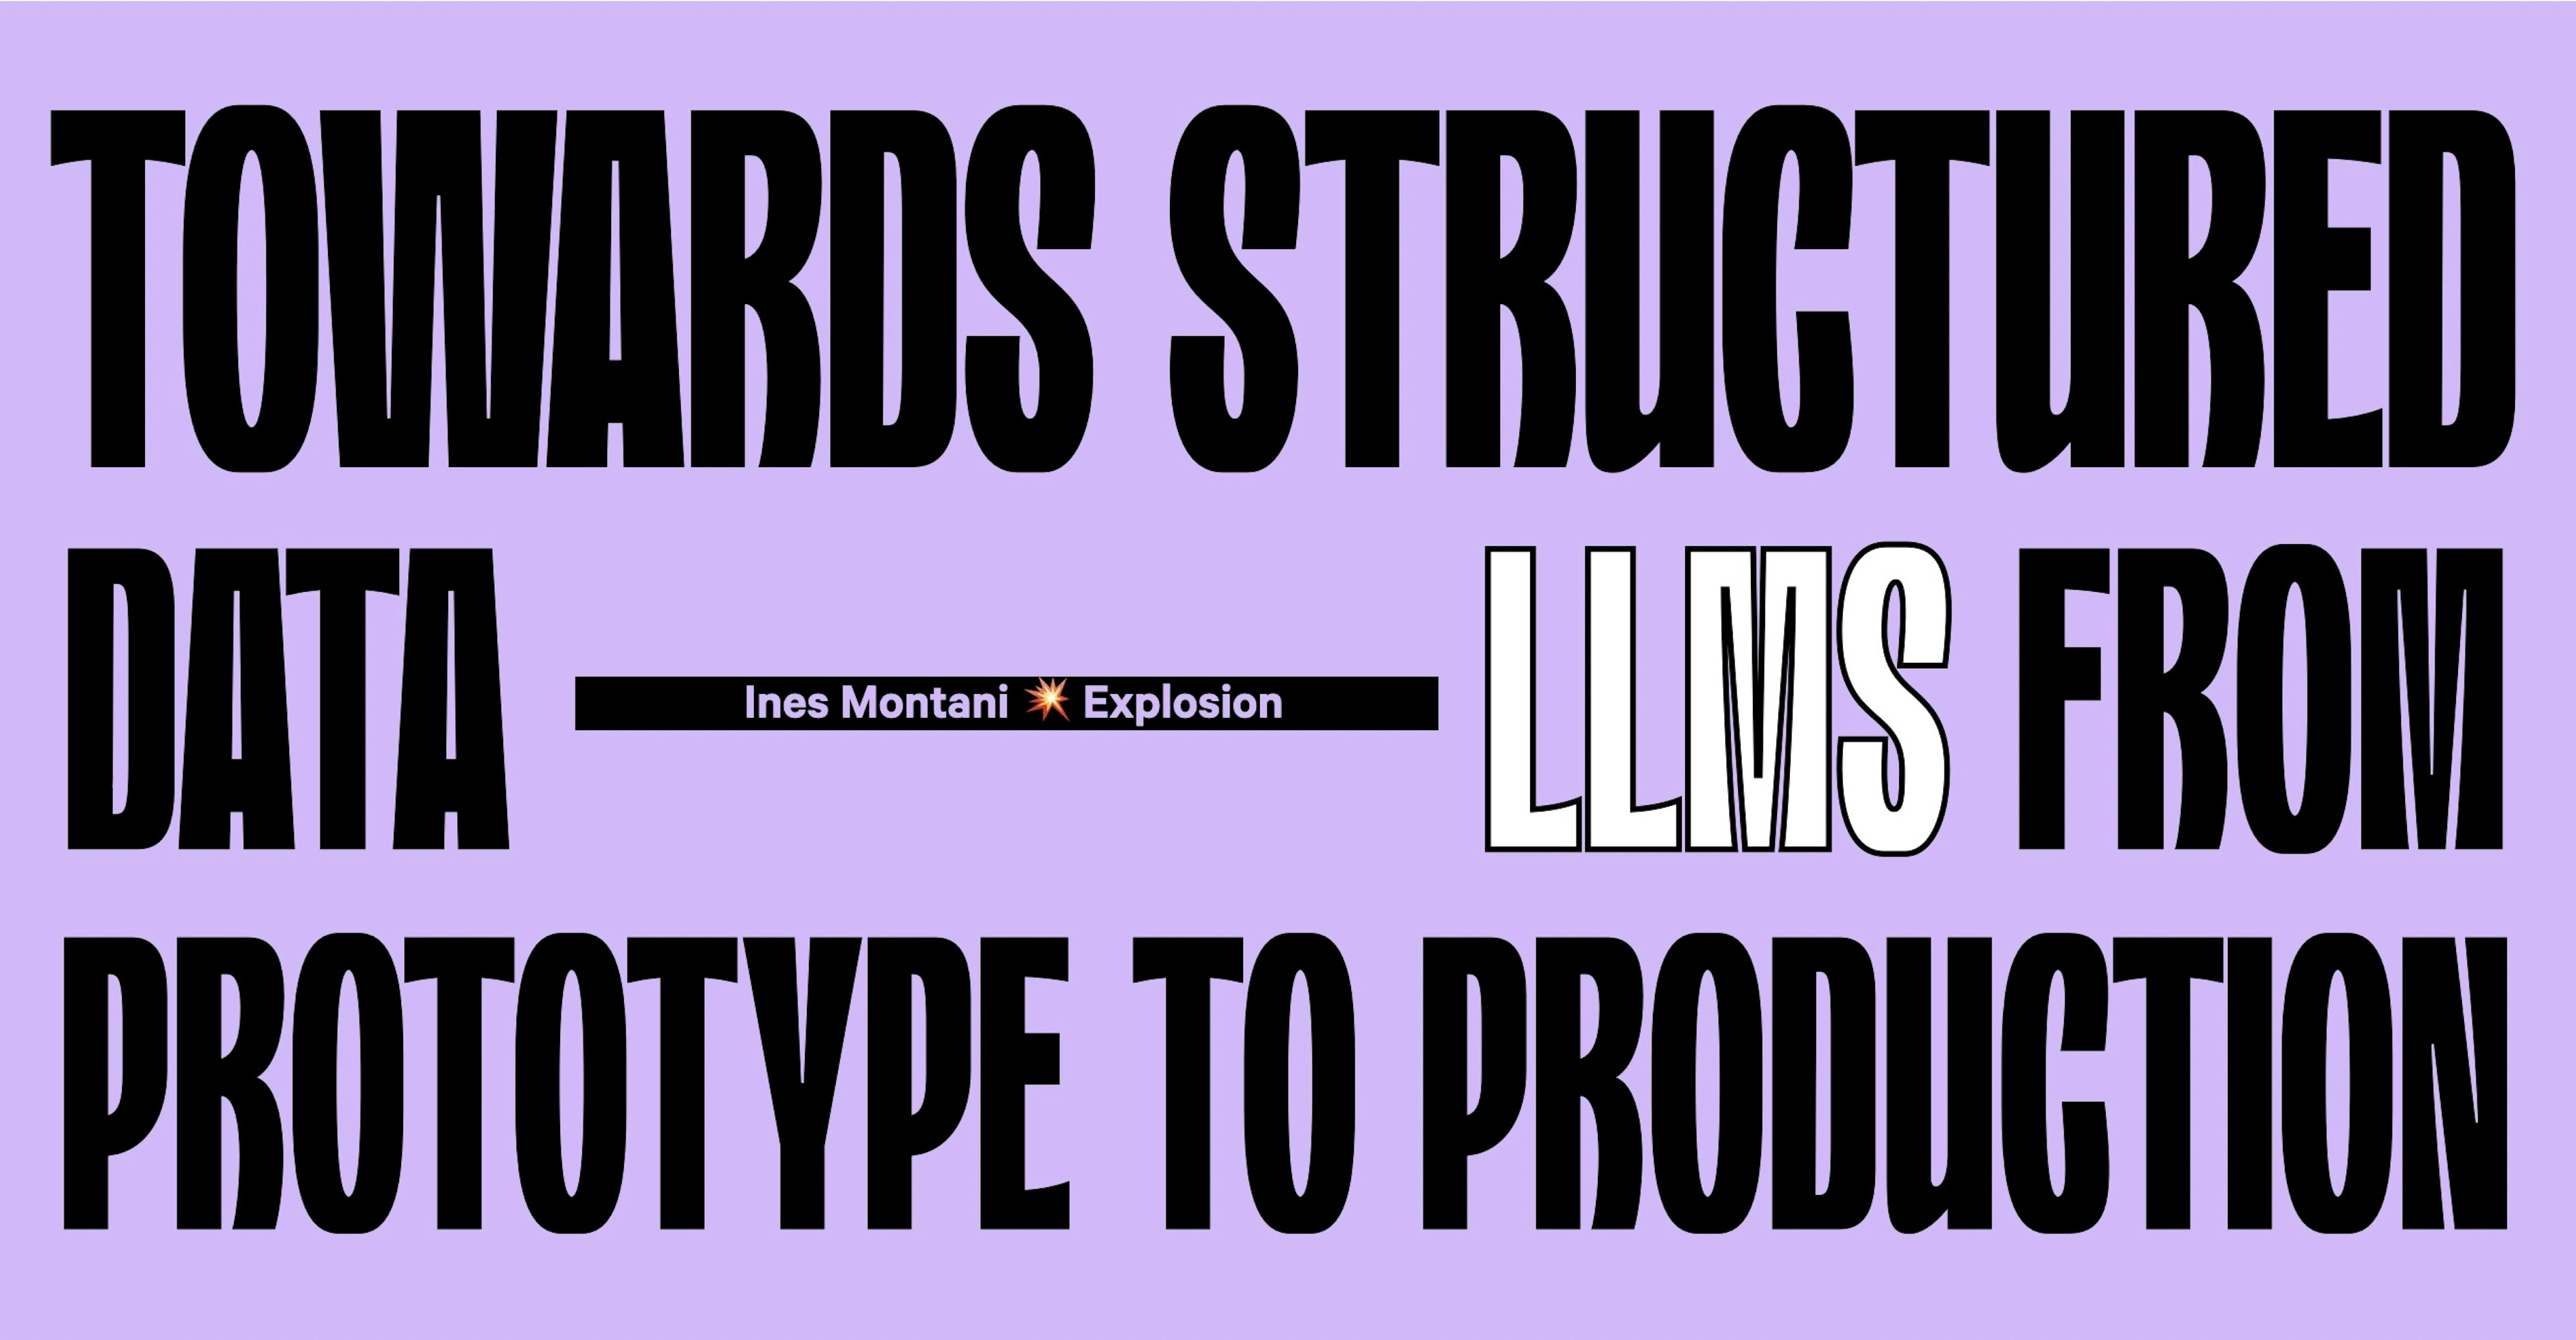 Towards Structured Data: LLMs from Prototype to Production